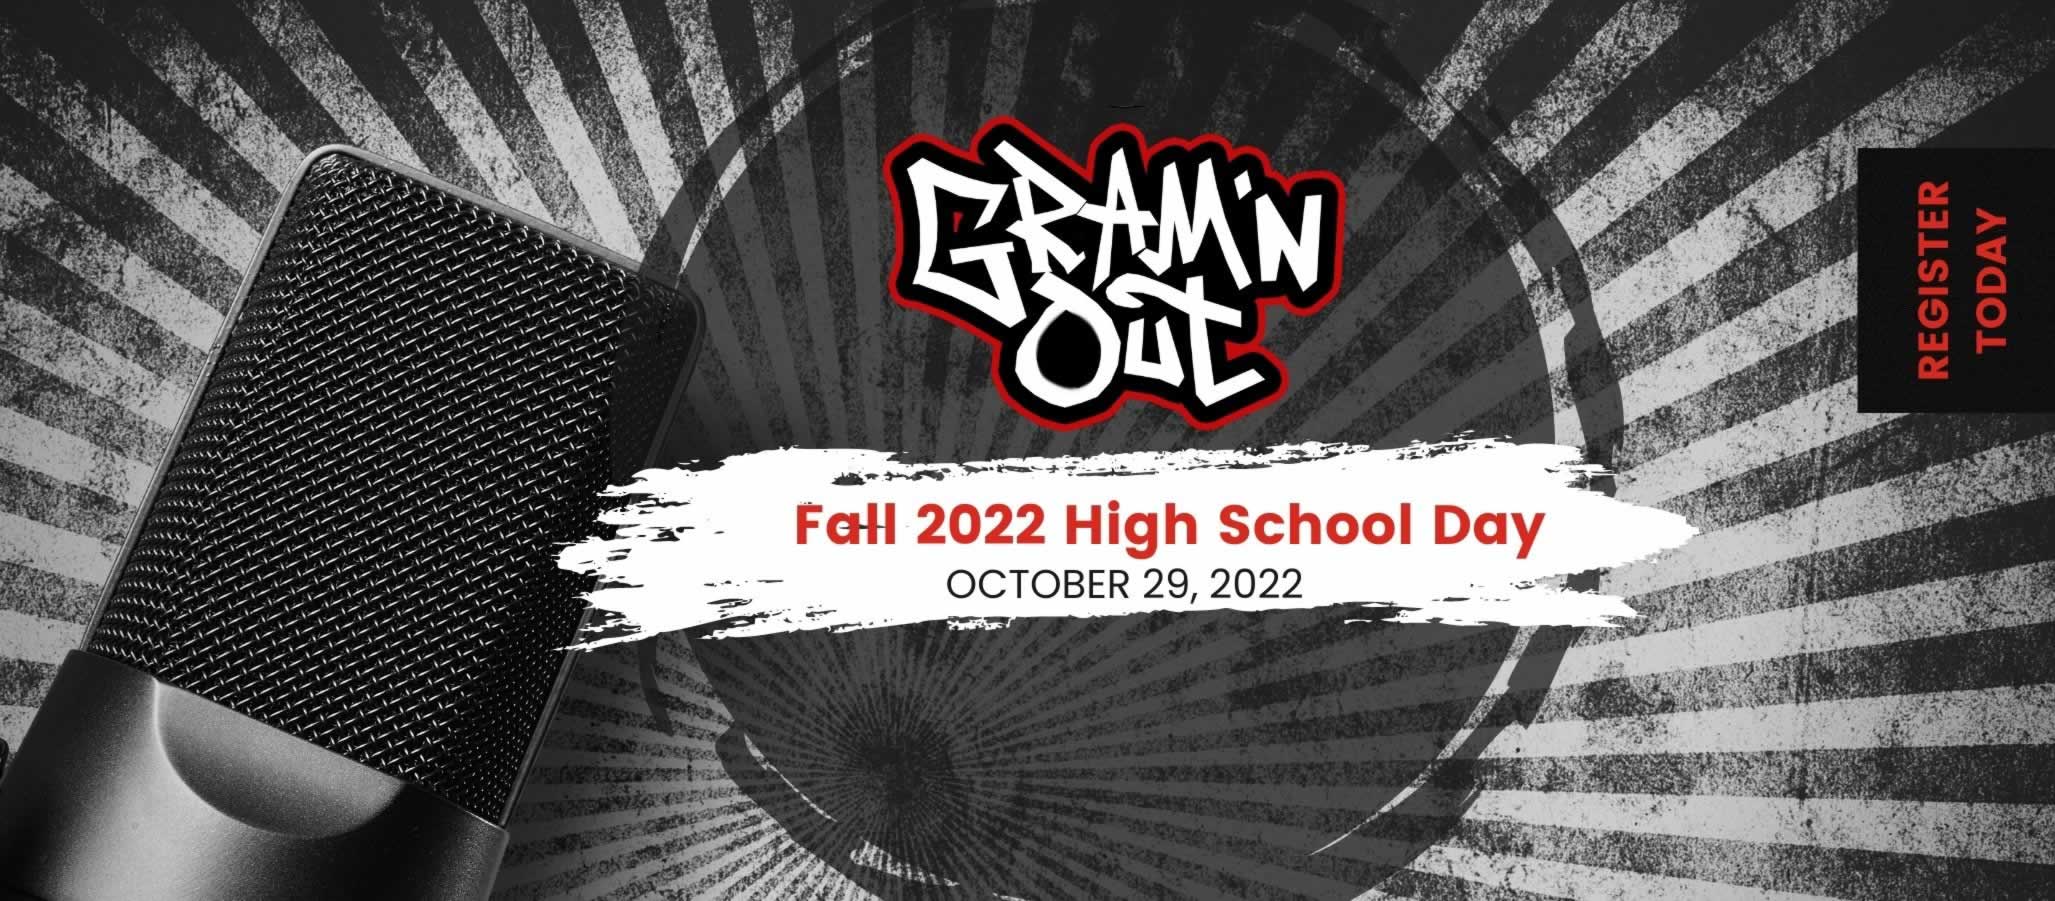 Fall 2022 High School Day - Oct. 29, Info and Register here!